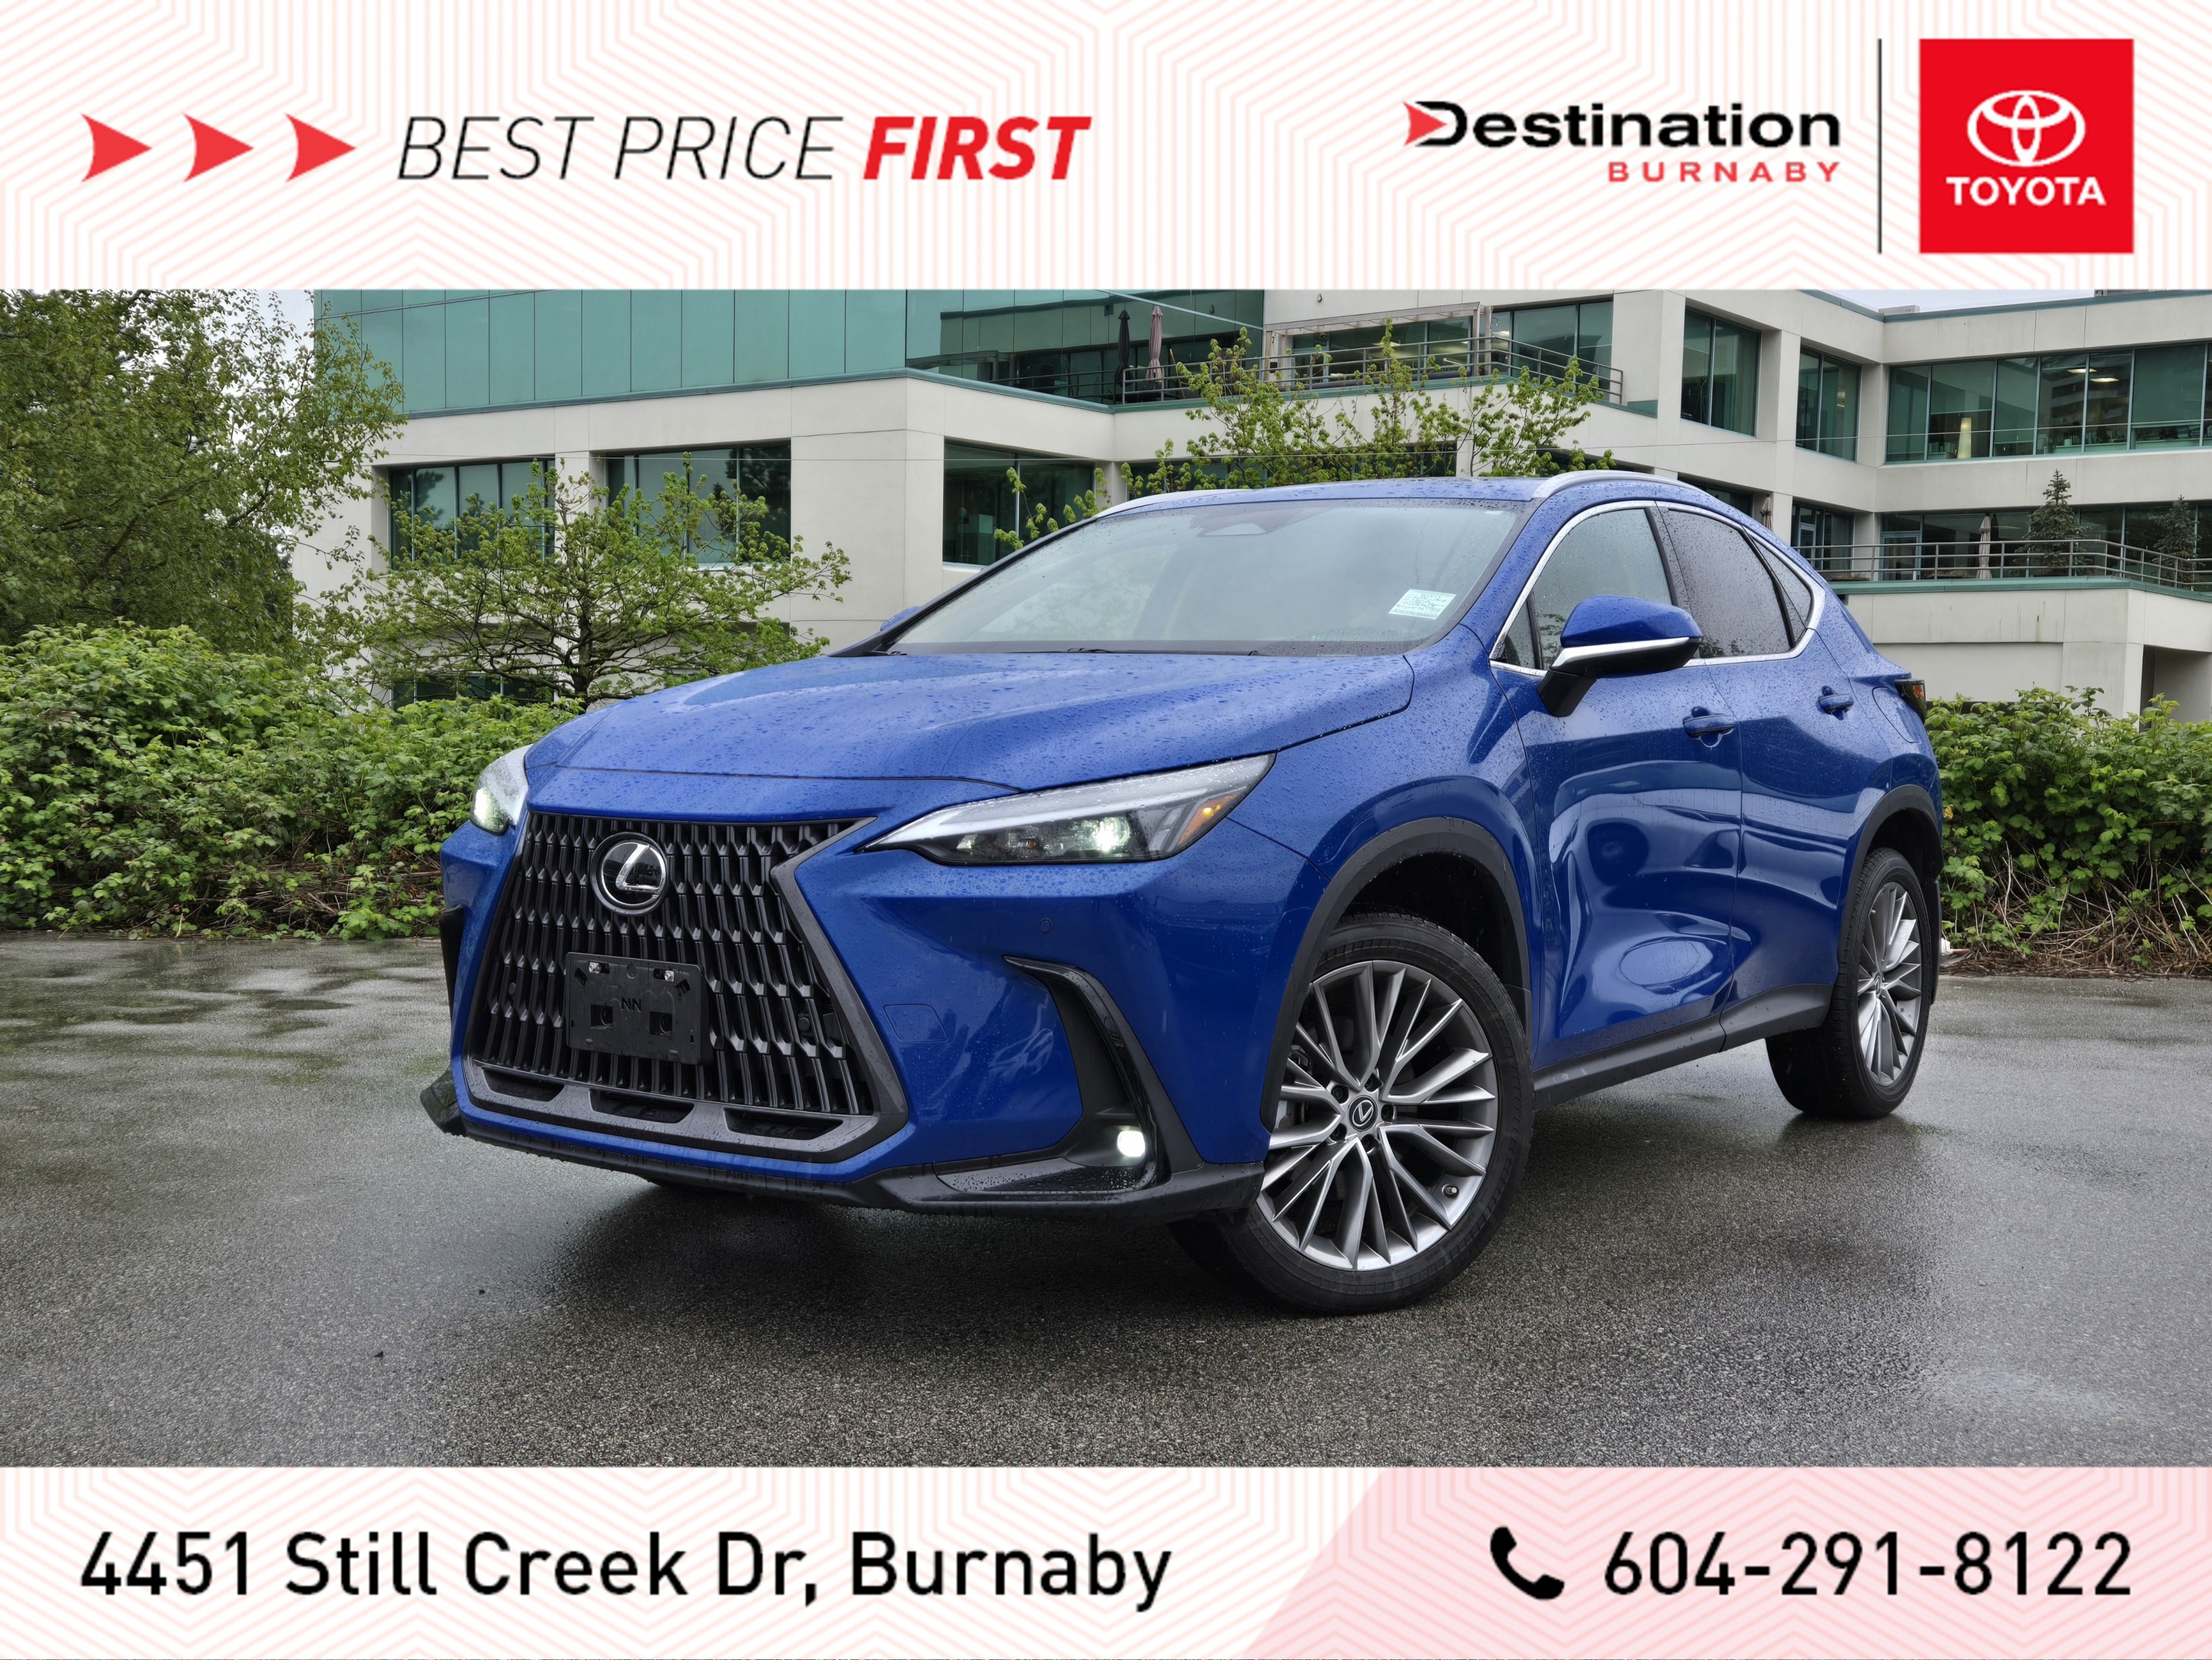 2023 Lexus NX 350 Ultra Premium AWD - Local, Loaded, No Accidents